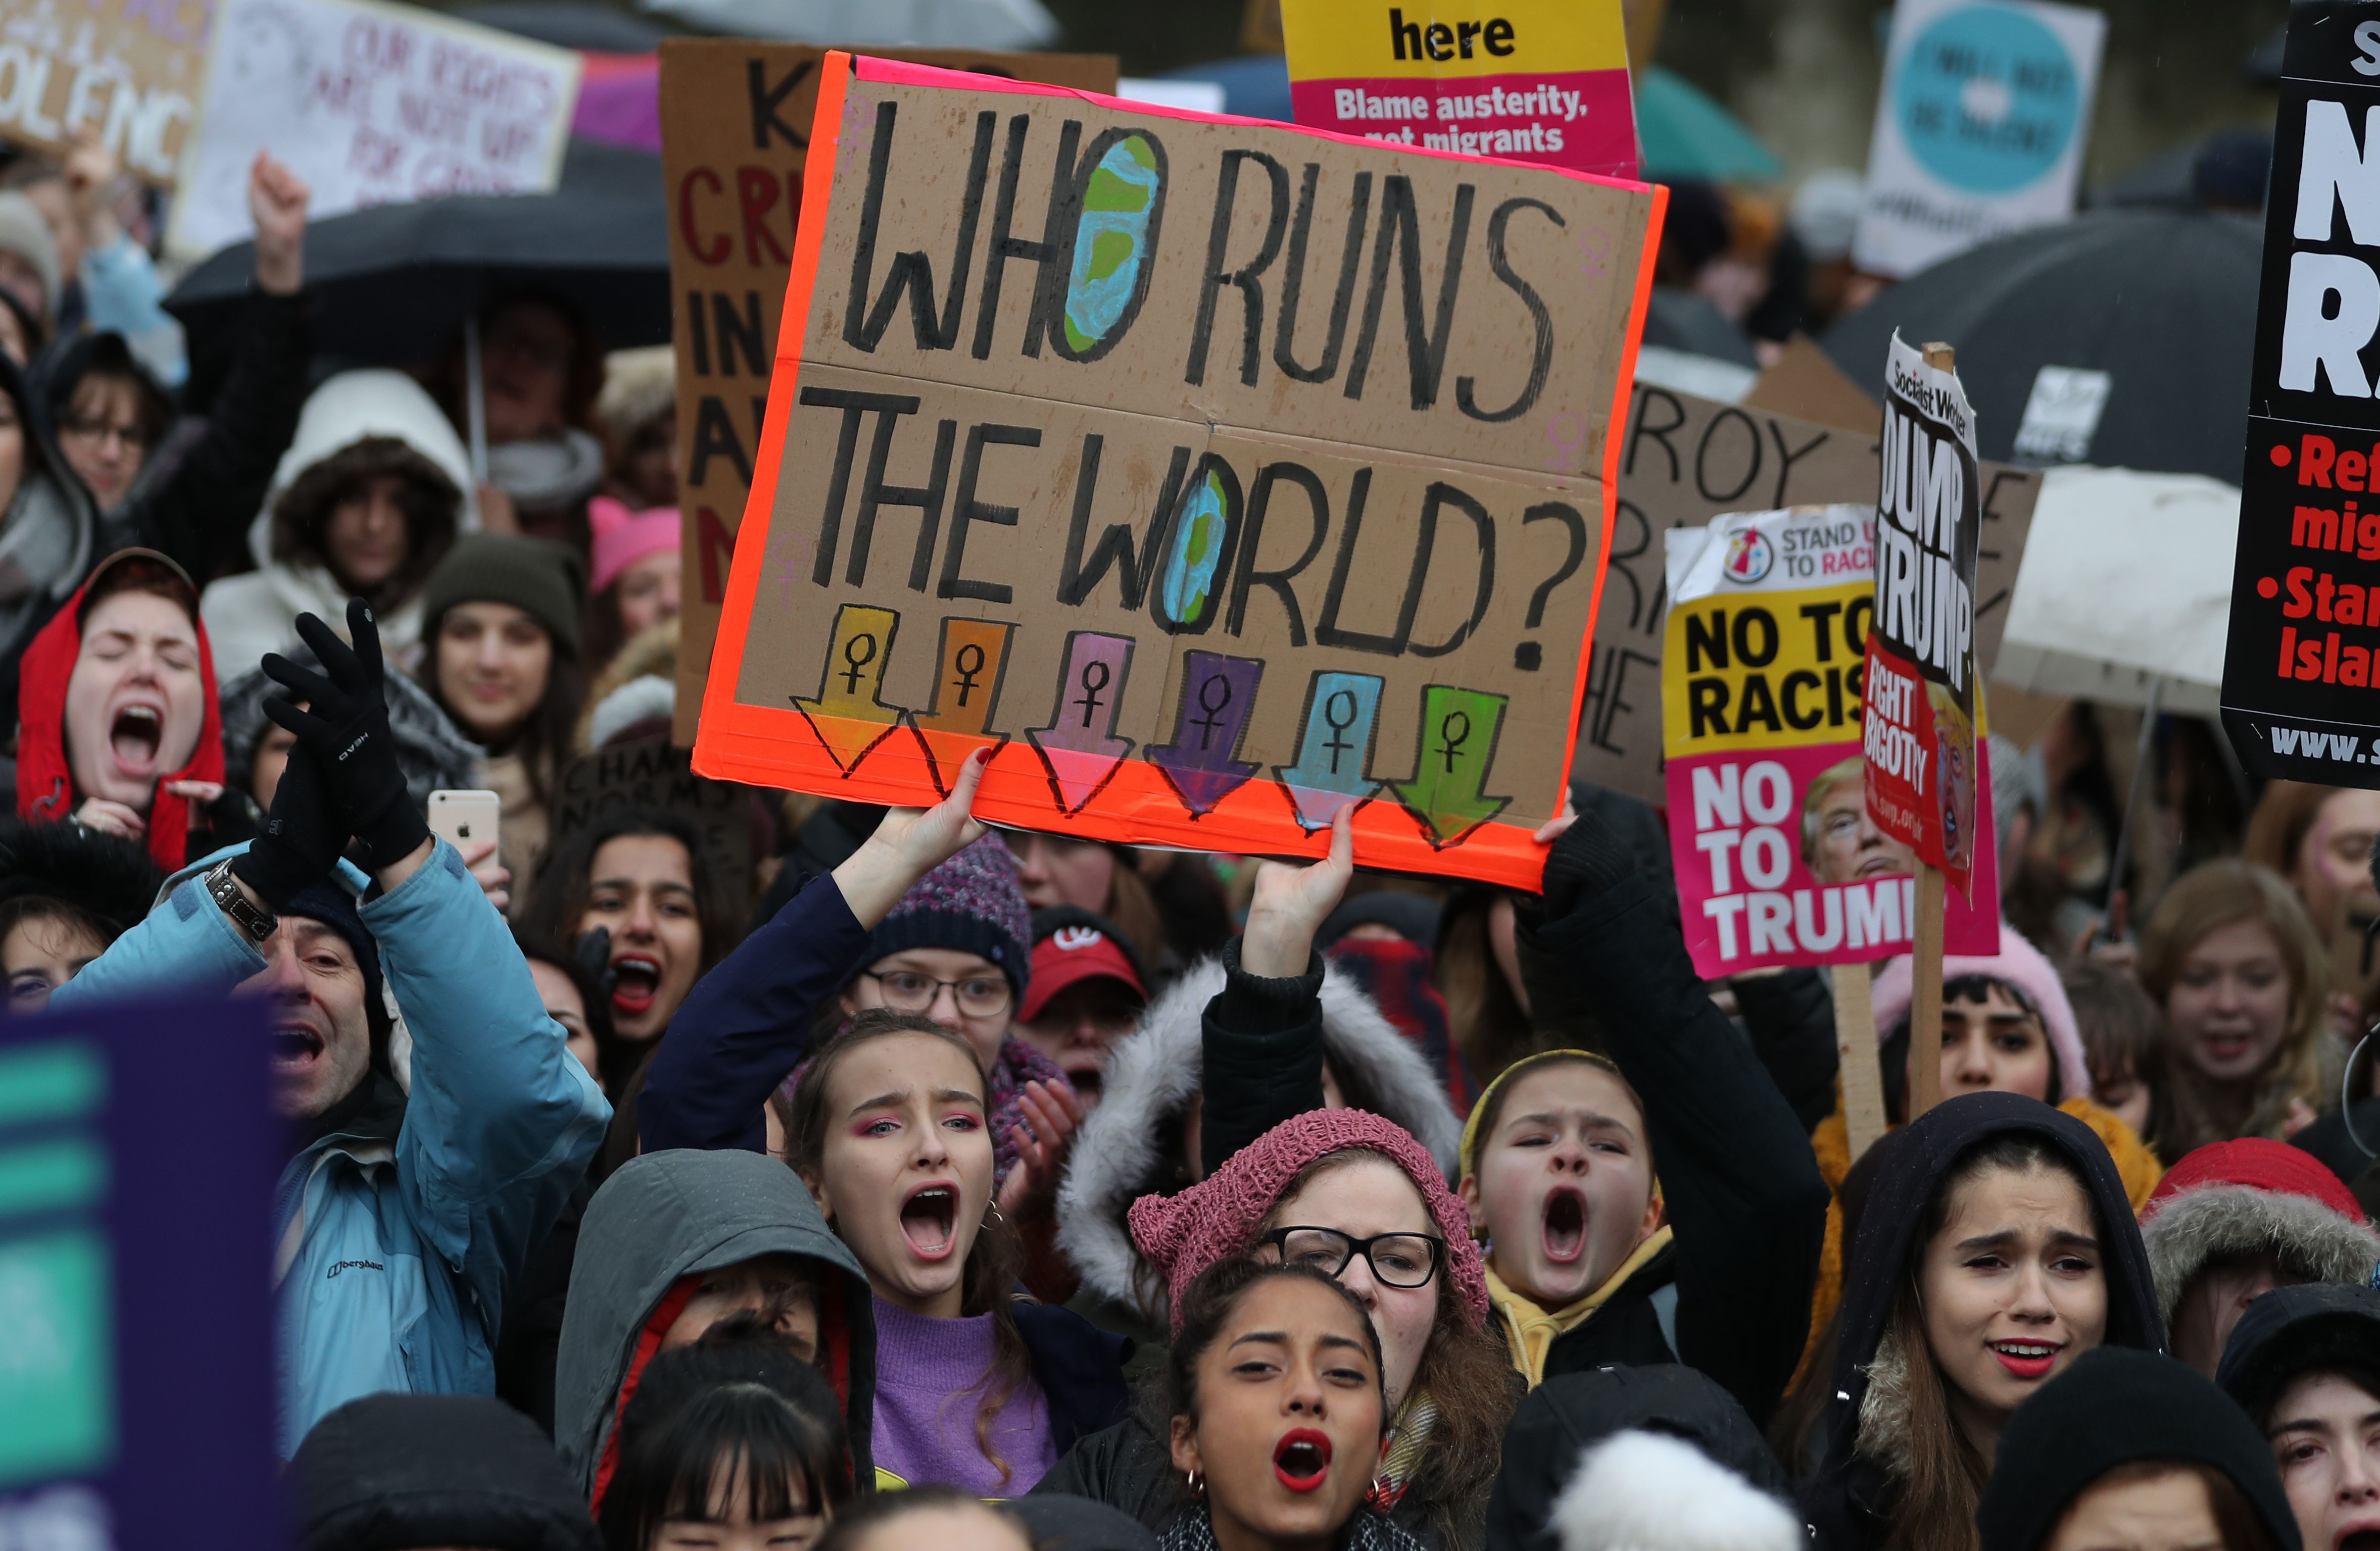 Protesters hold up placards during the Women's March in London on Jan. 21, 2018 as part of a global day of protests, a year to the day since Donald Trump took office as U.S. president. (Daniel Leal-Olivas—AFP/Getty Images)